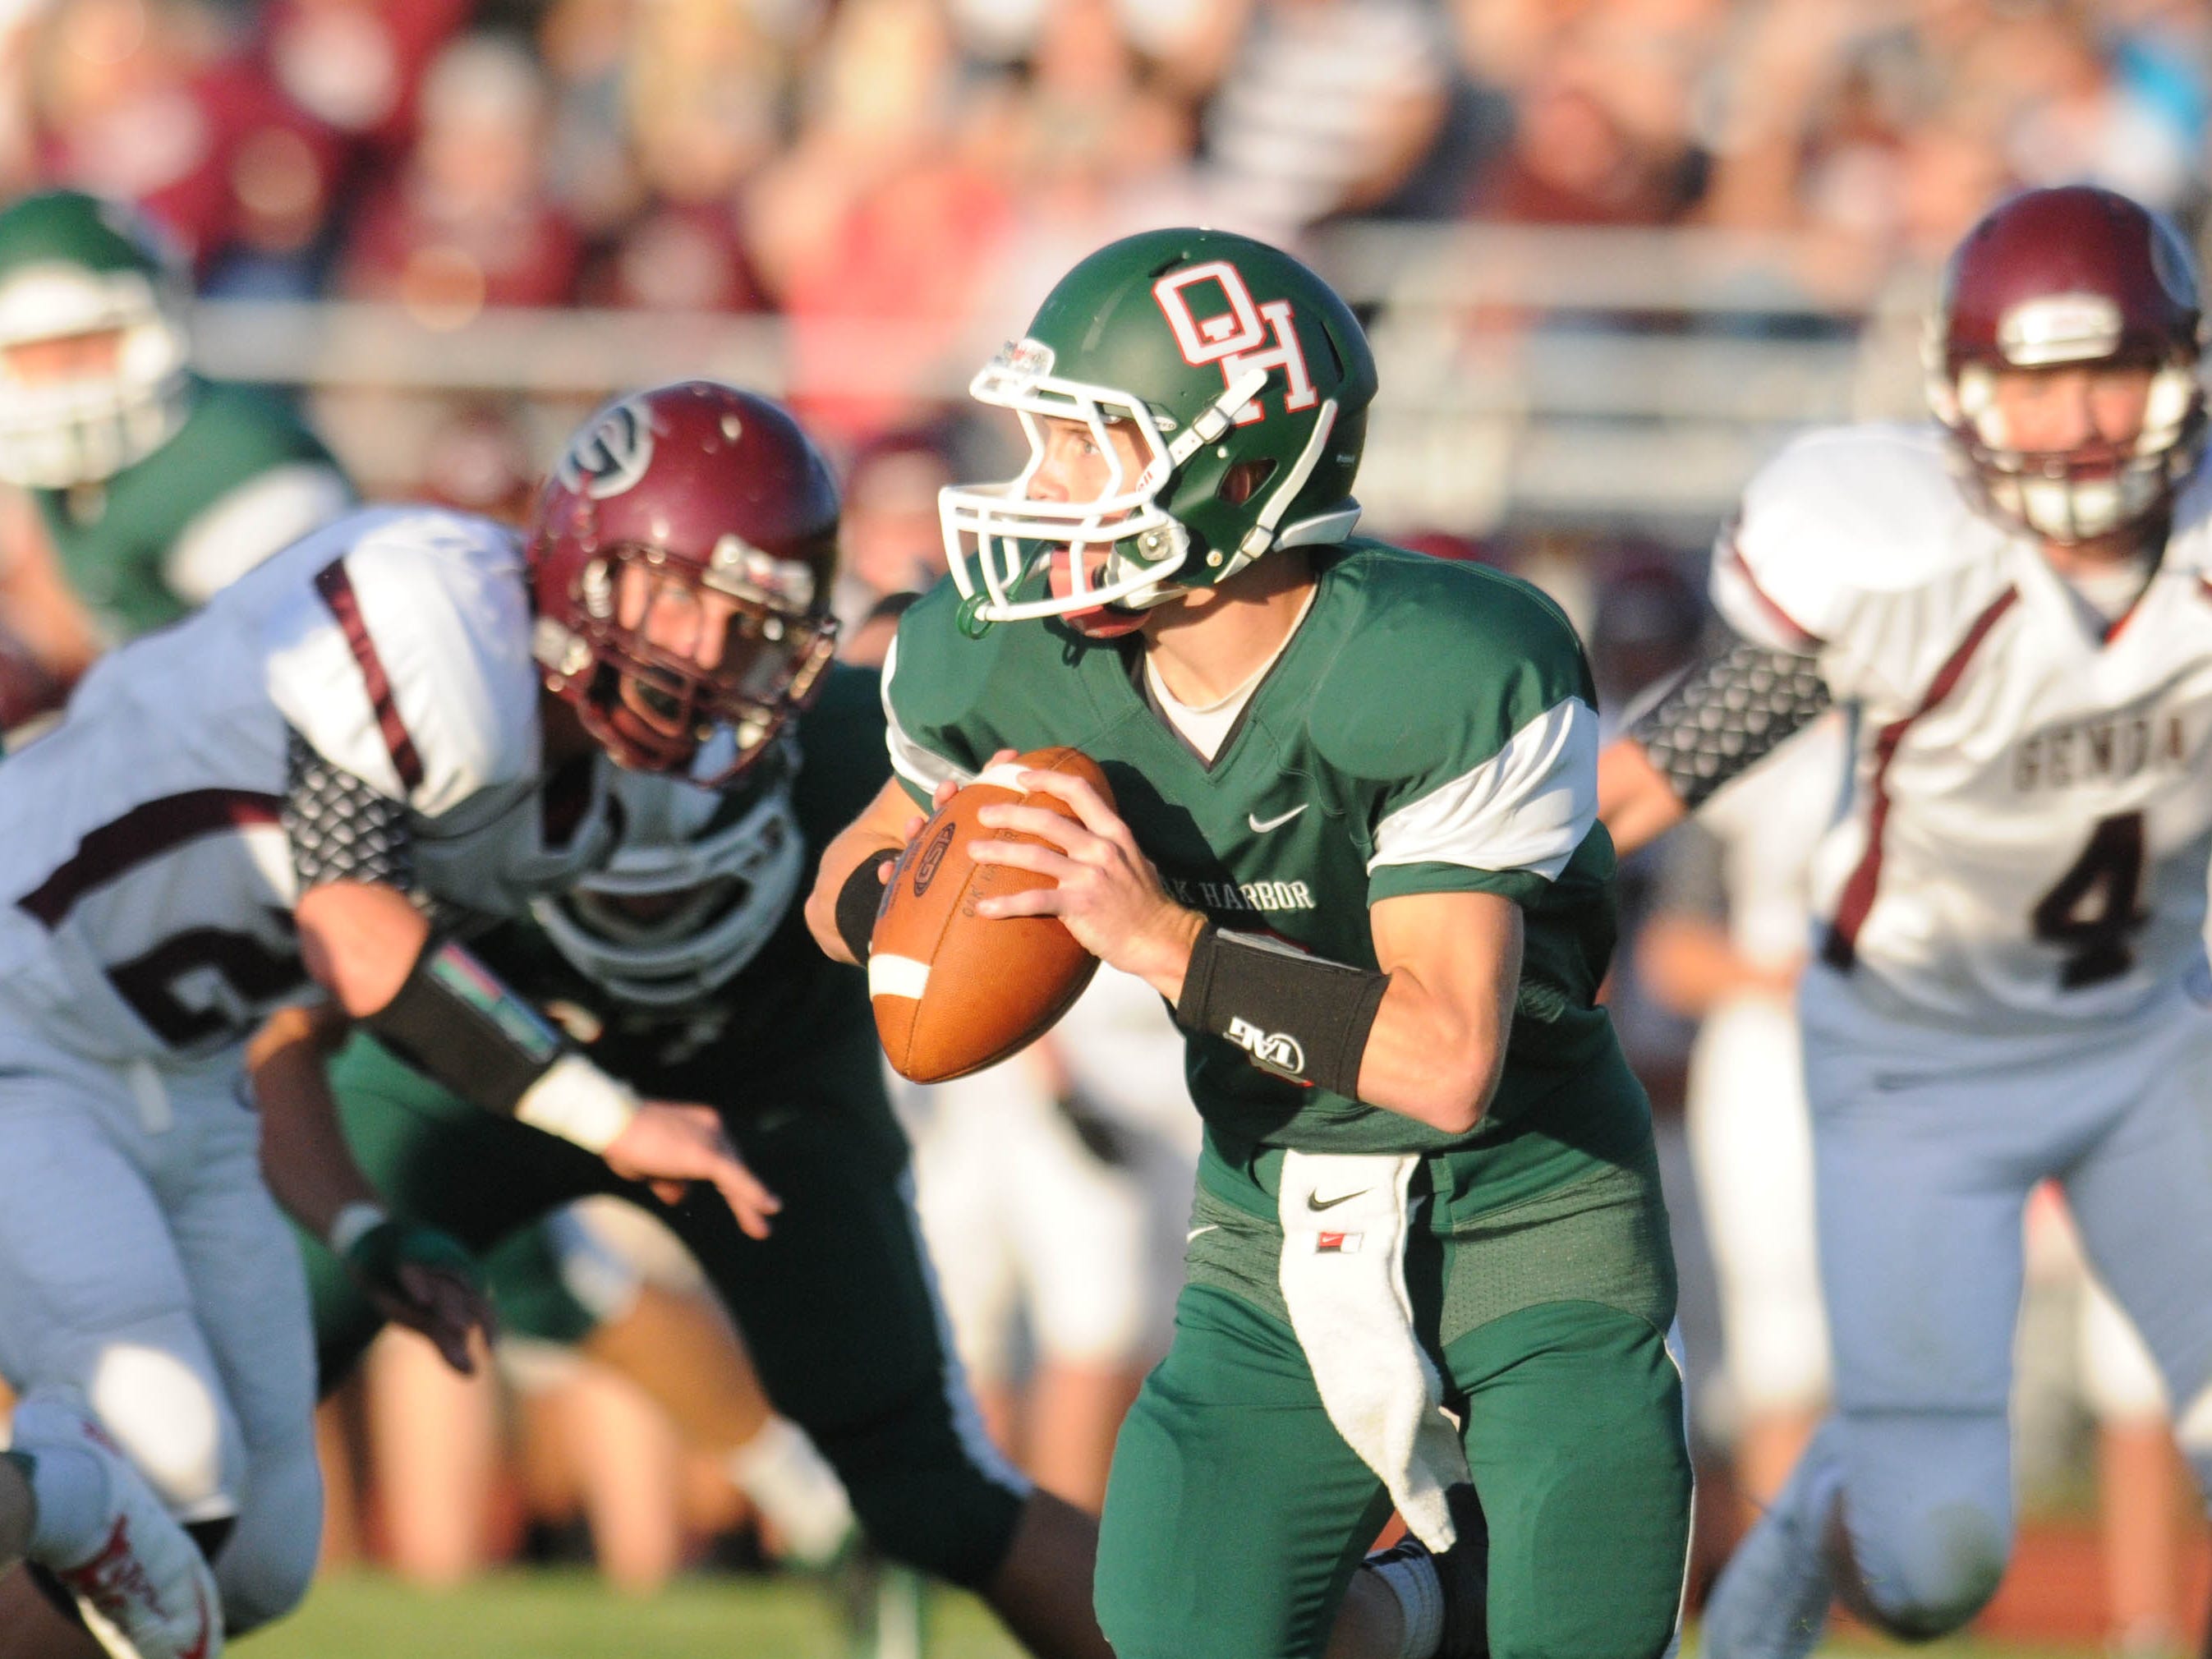 Oak Harbor's Cole Weirich is chased by the Genoa defense as he looks to throw during the first half of a football game on Friday, Sept 6, 2013. Jonathon Bird/News Herald